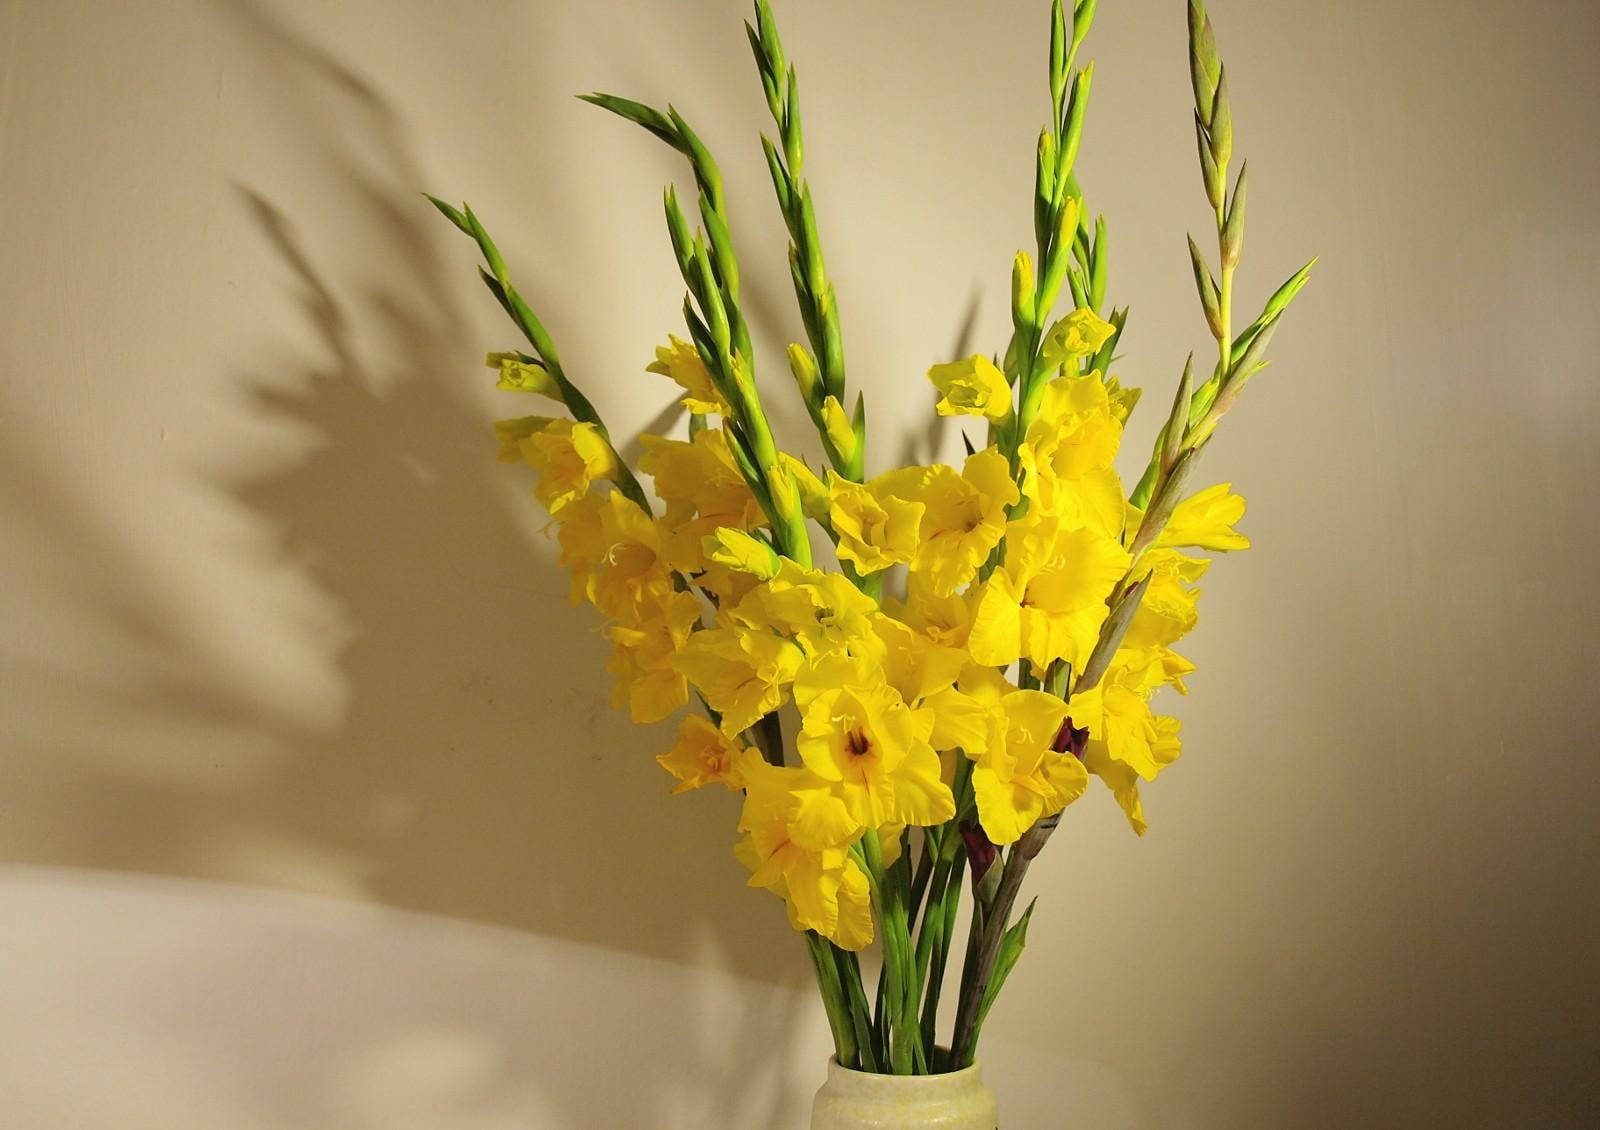 Vibrant Yellow Gladiolus Flowers In A Vase Background